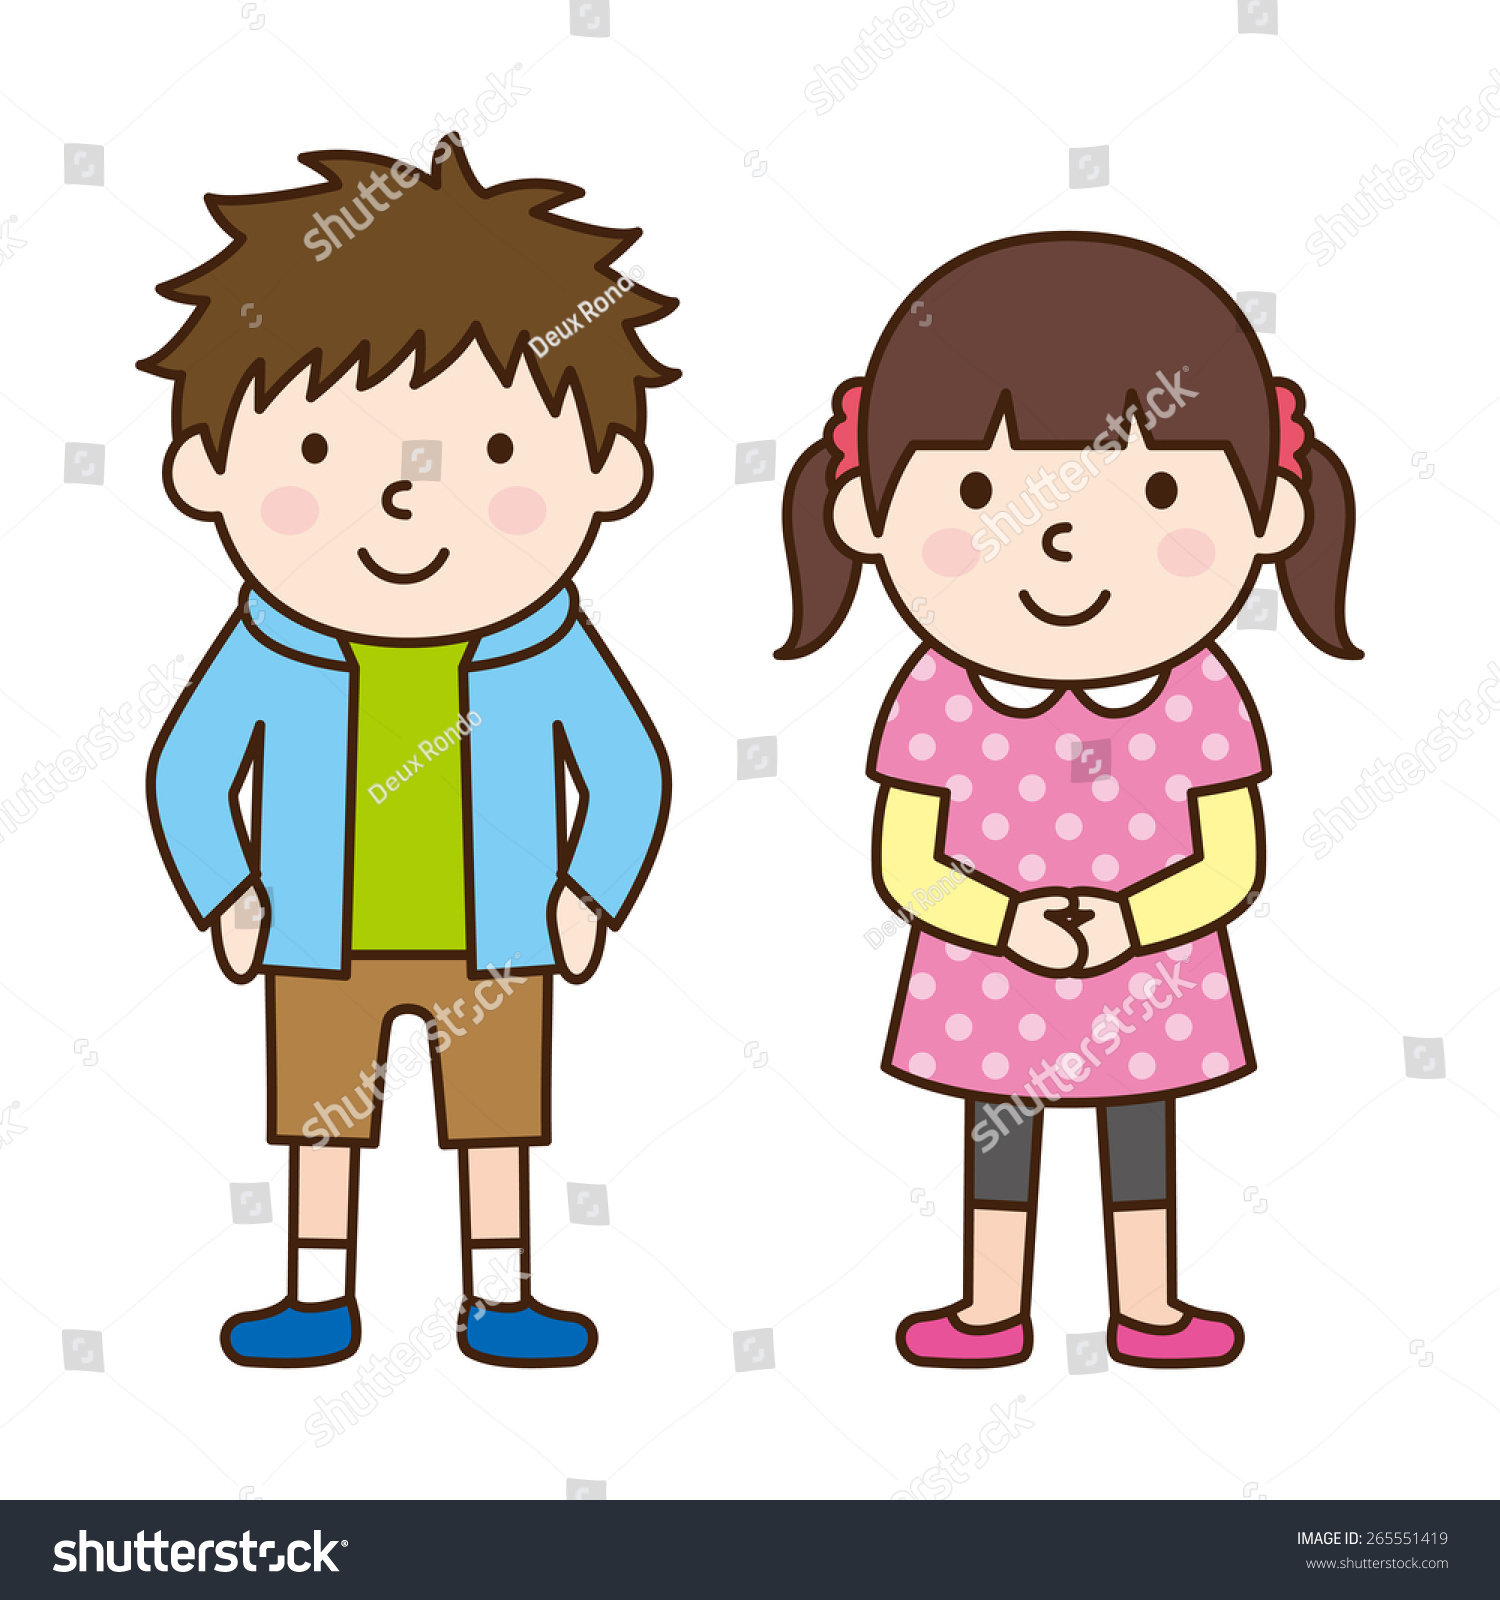 Children / Brother And Sister Stock Vector Illustration 265551419